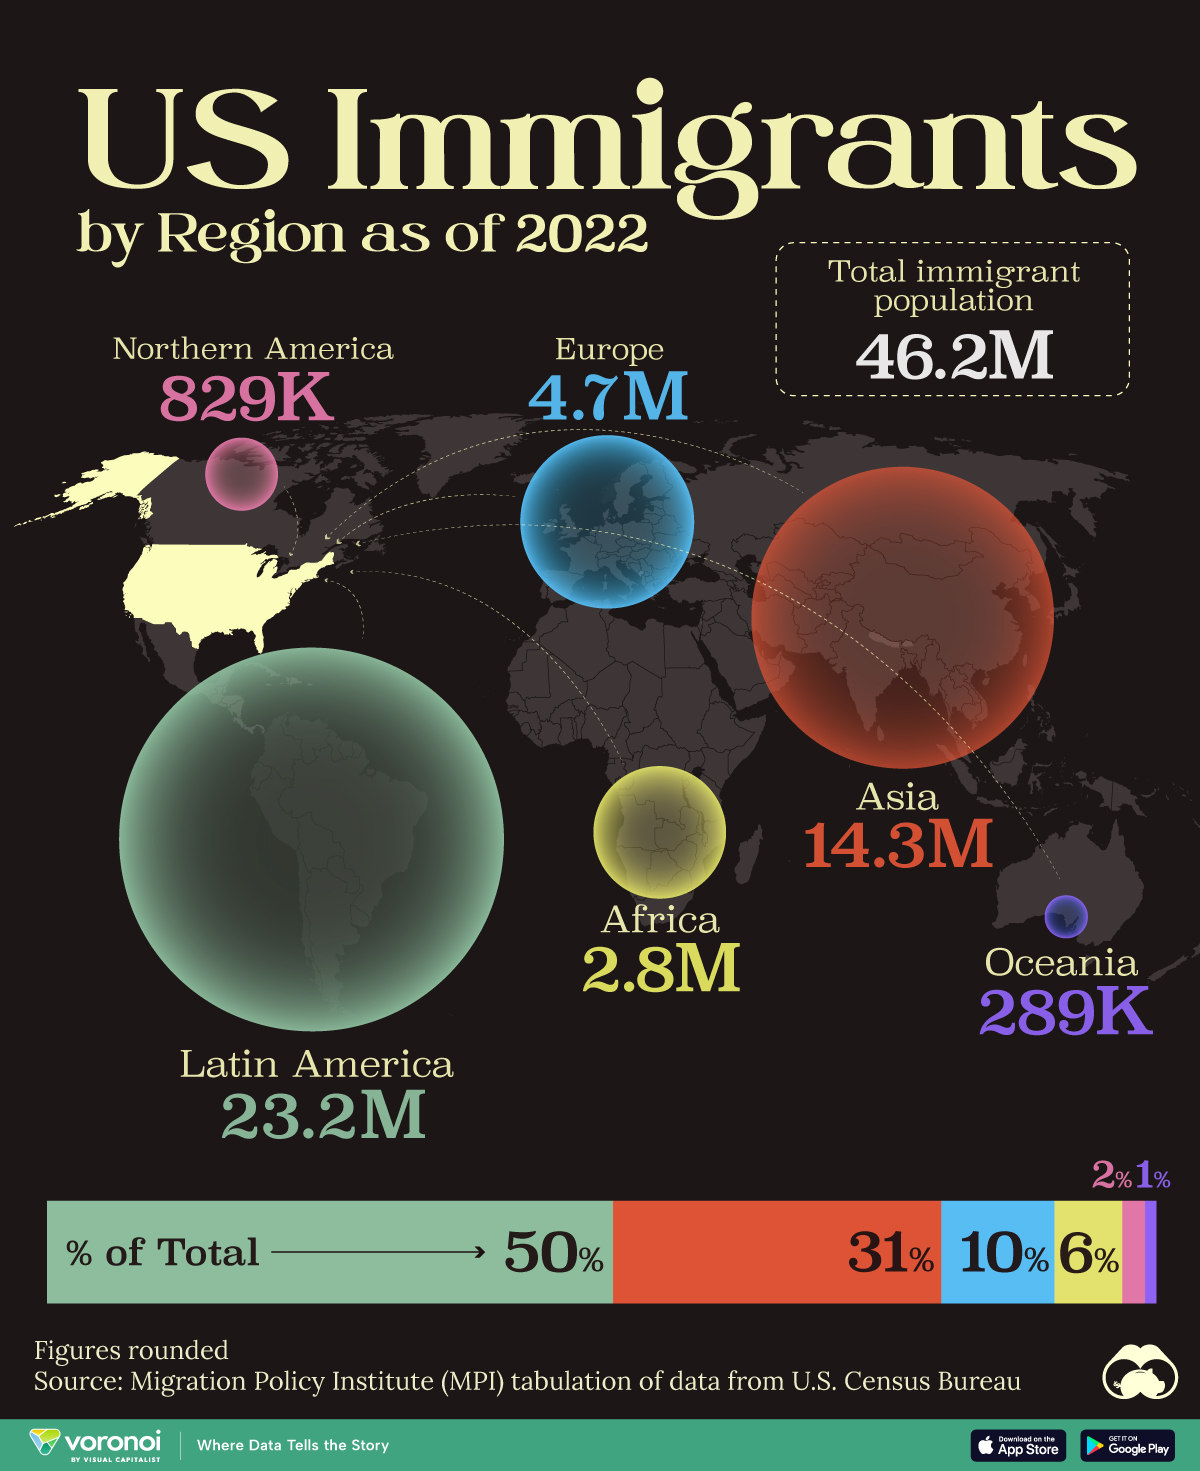 This map shows which regions U.S. immigrants came from, based on 2022 estimates.